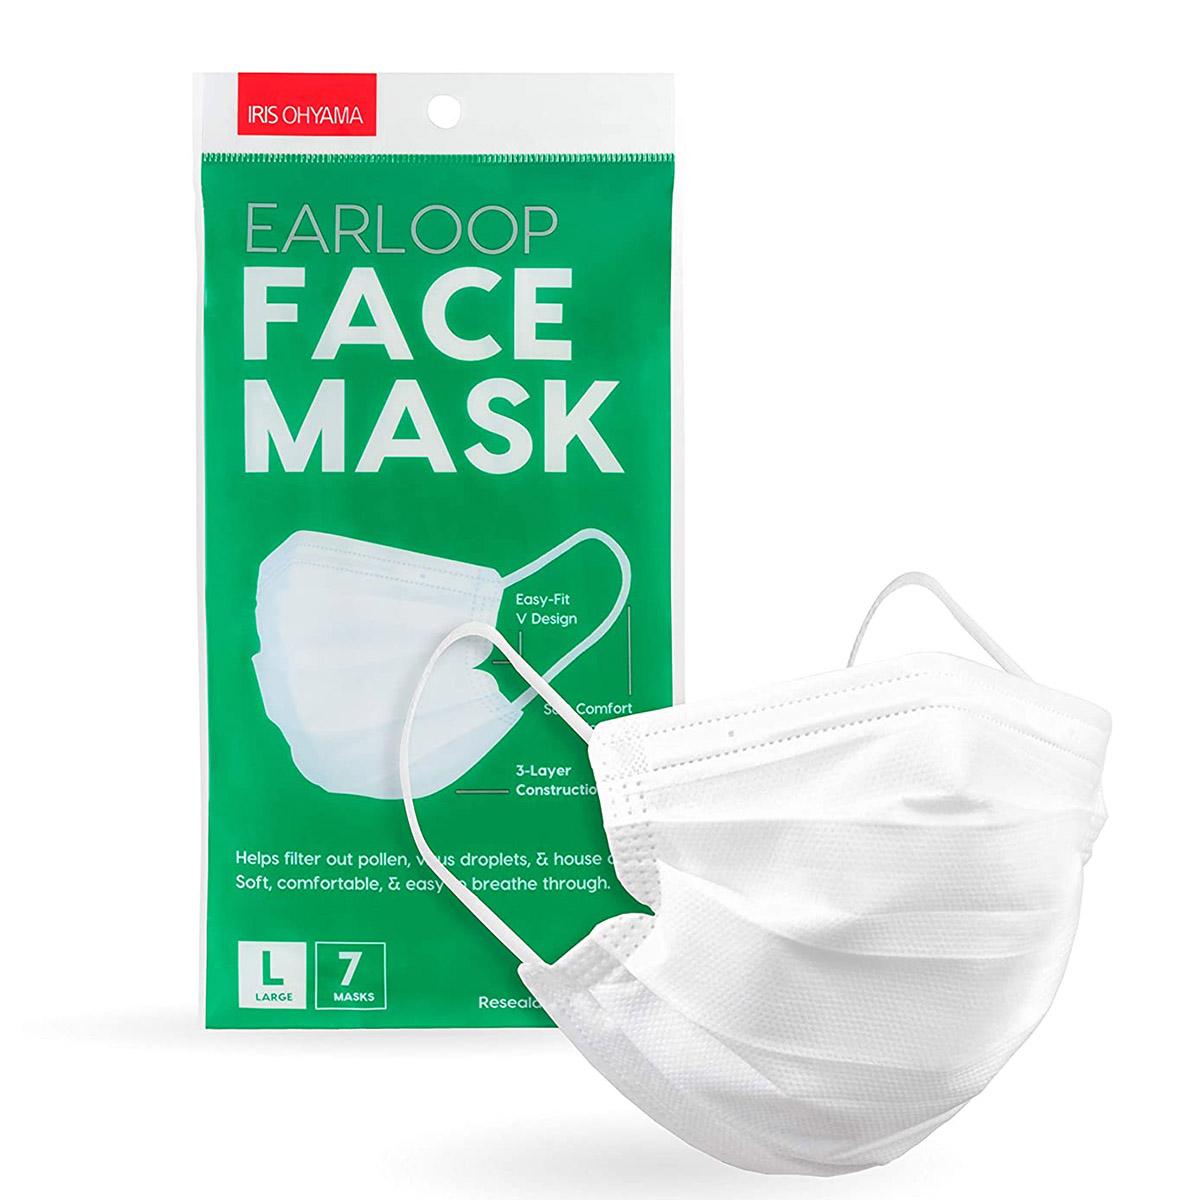 7 Disposable 3-ply Earloop Face Masks for $3.99